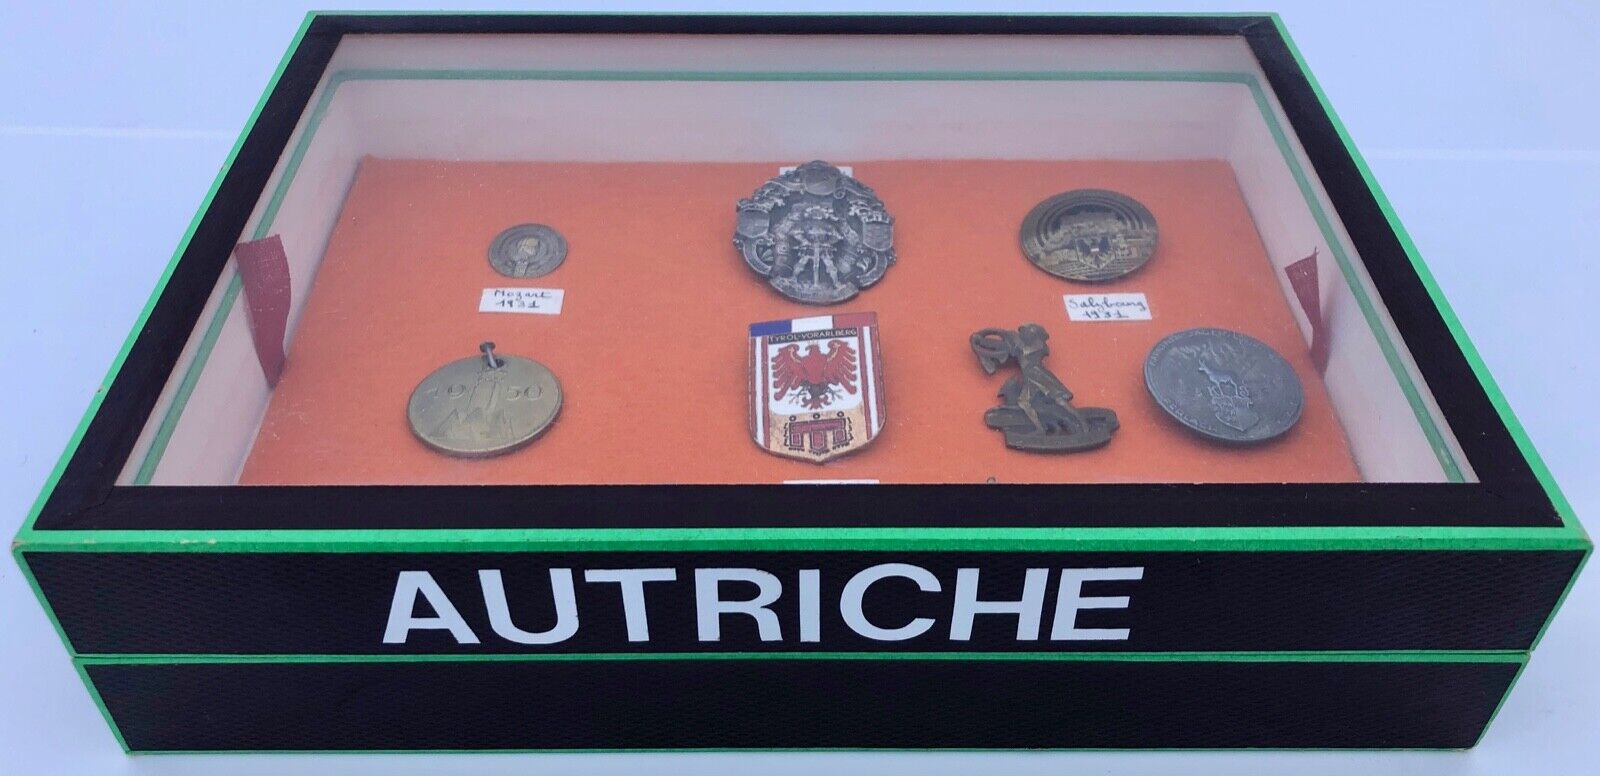 Set of Nine Austrian Commemorative Medals in a Display Box, Mid-20th Century